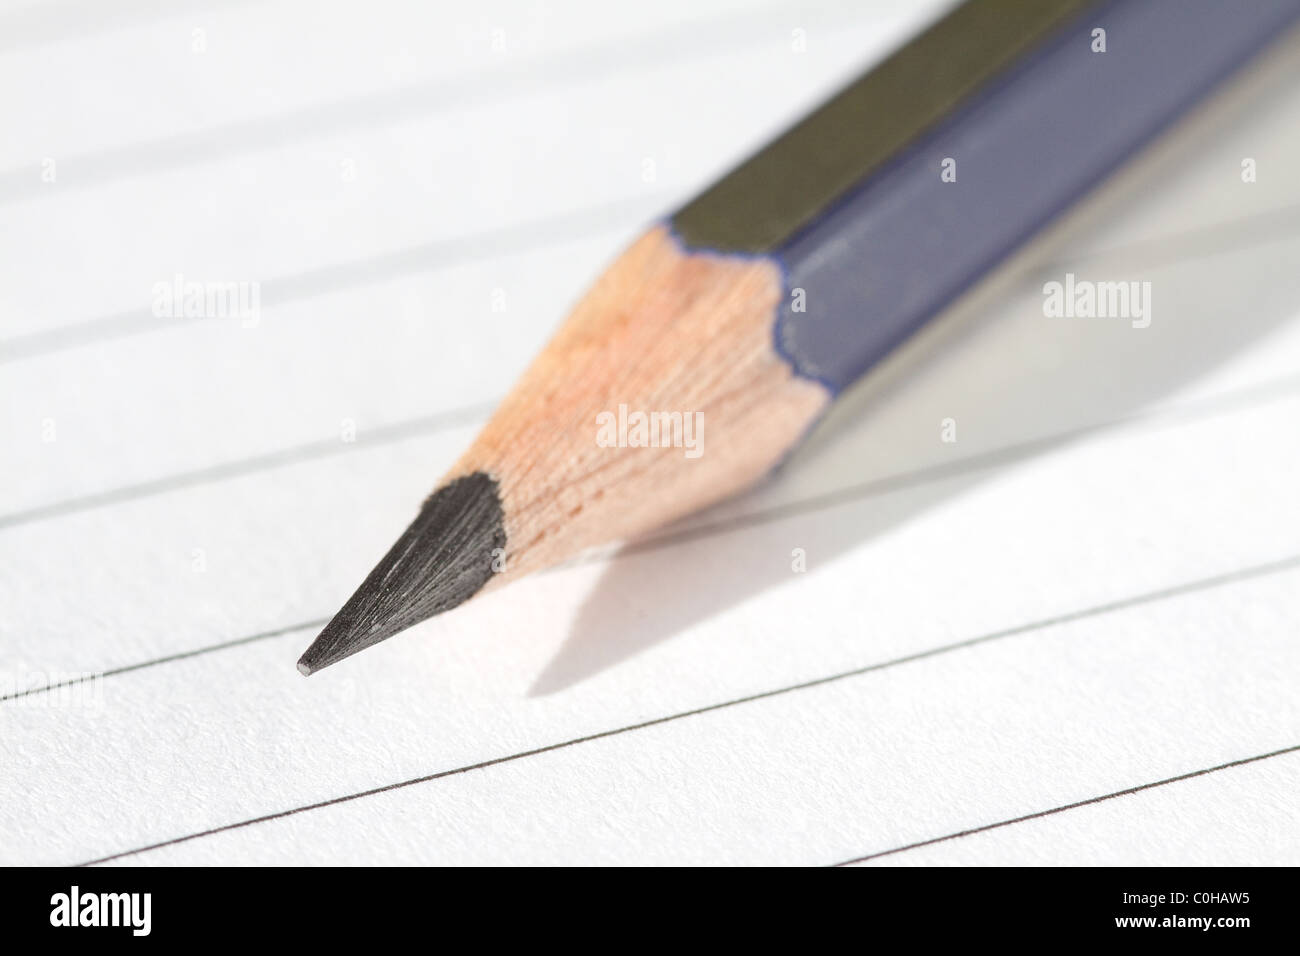 A sharpened pencil on a white lined piece of paper Stock Photo